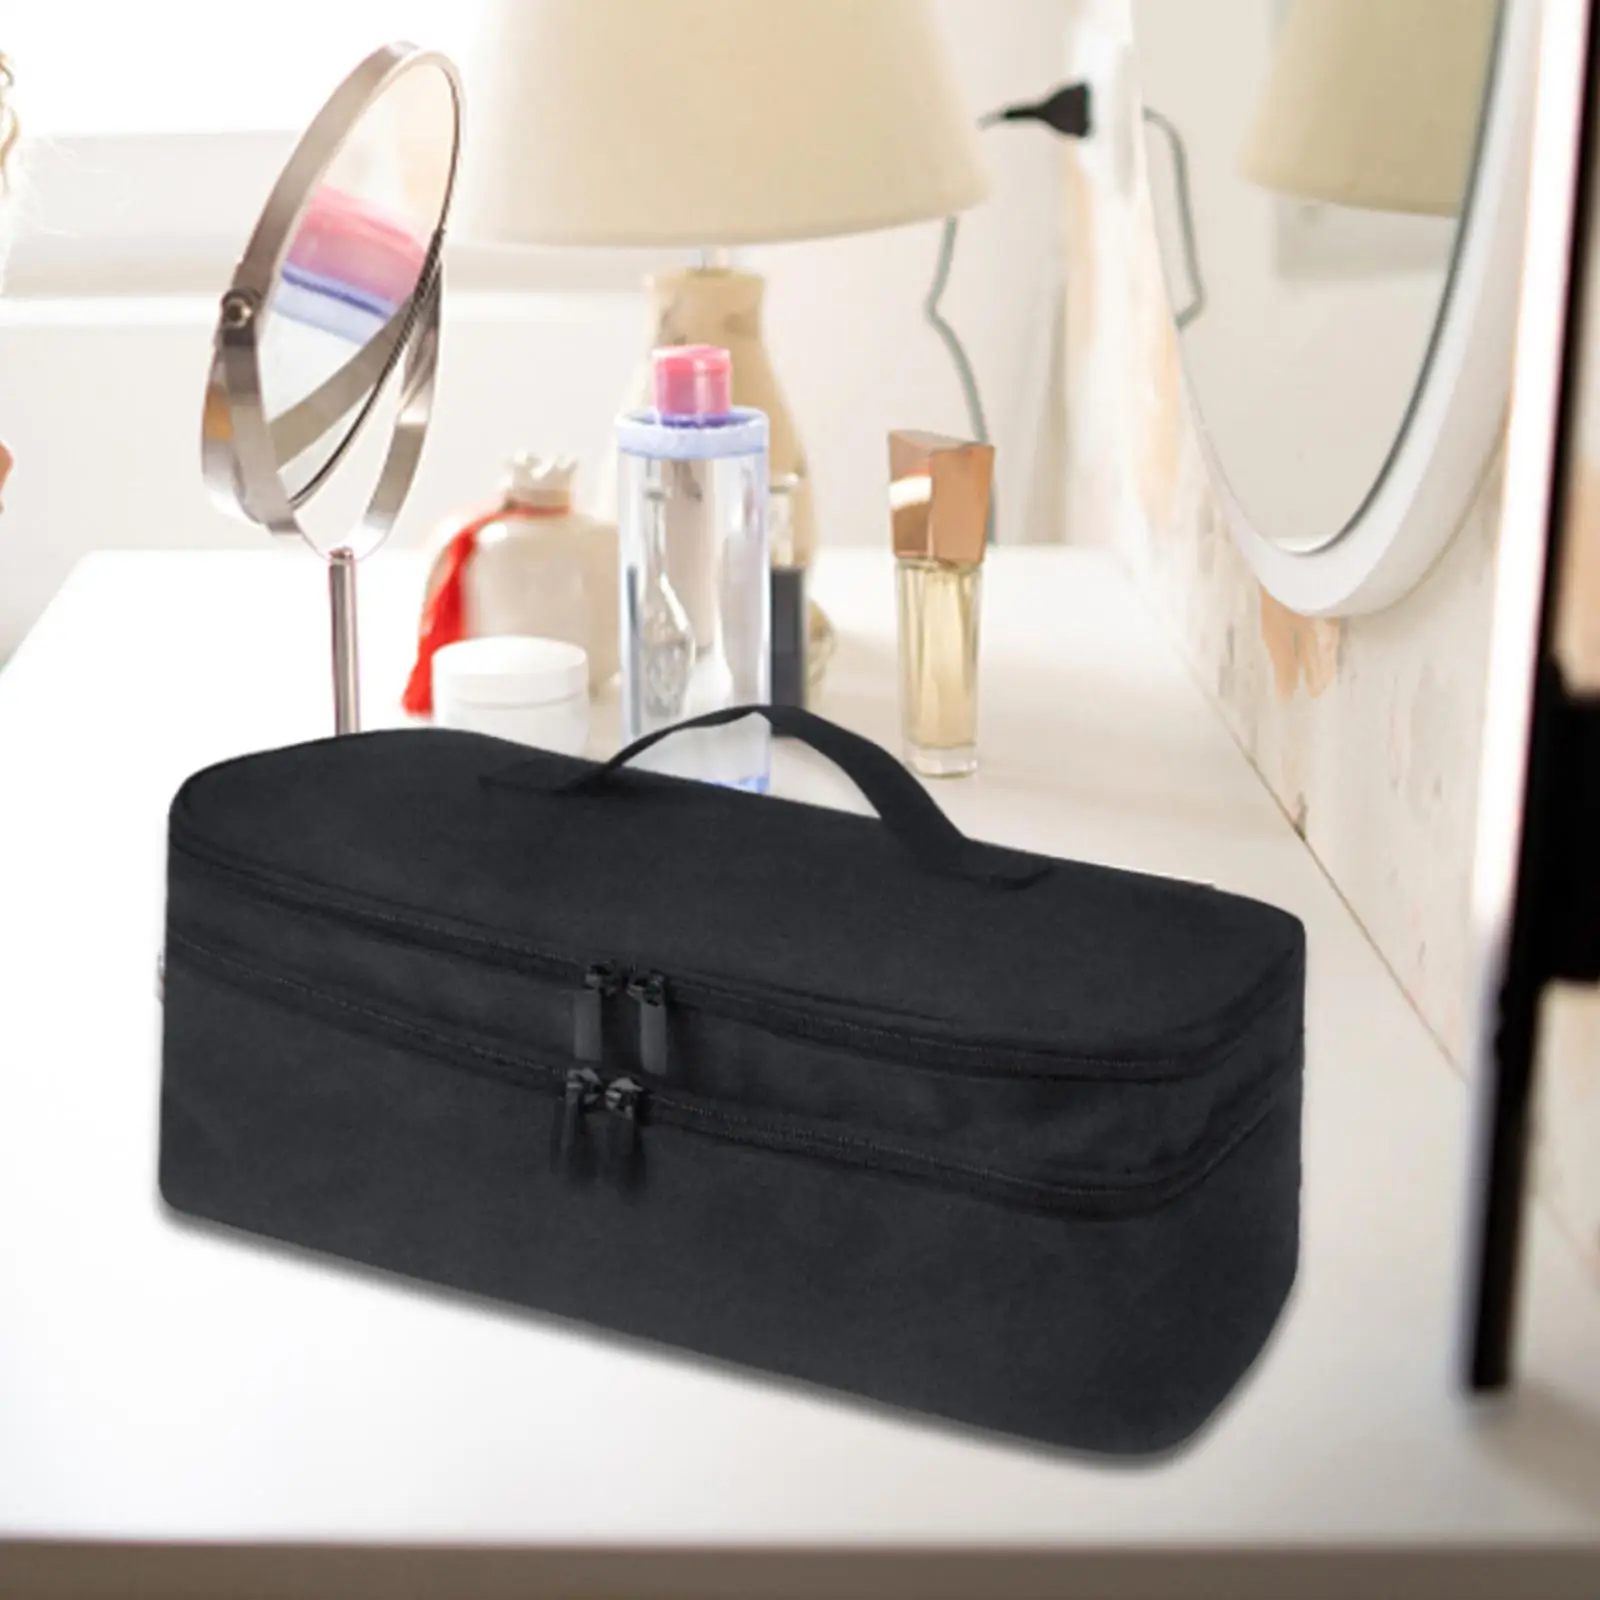 Hair Dryer Travel Carrying Case Double Layer Padded Cushion Interior Portable 15x5.5x5.5inch Sturdy for Hair Curler Accessories